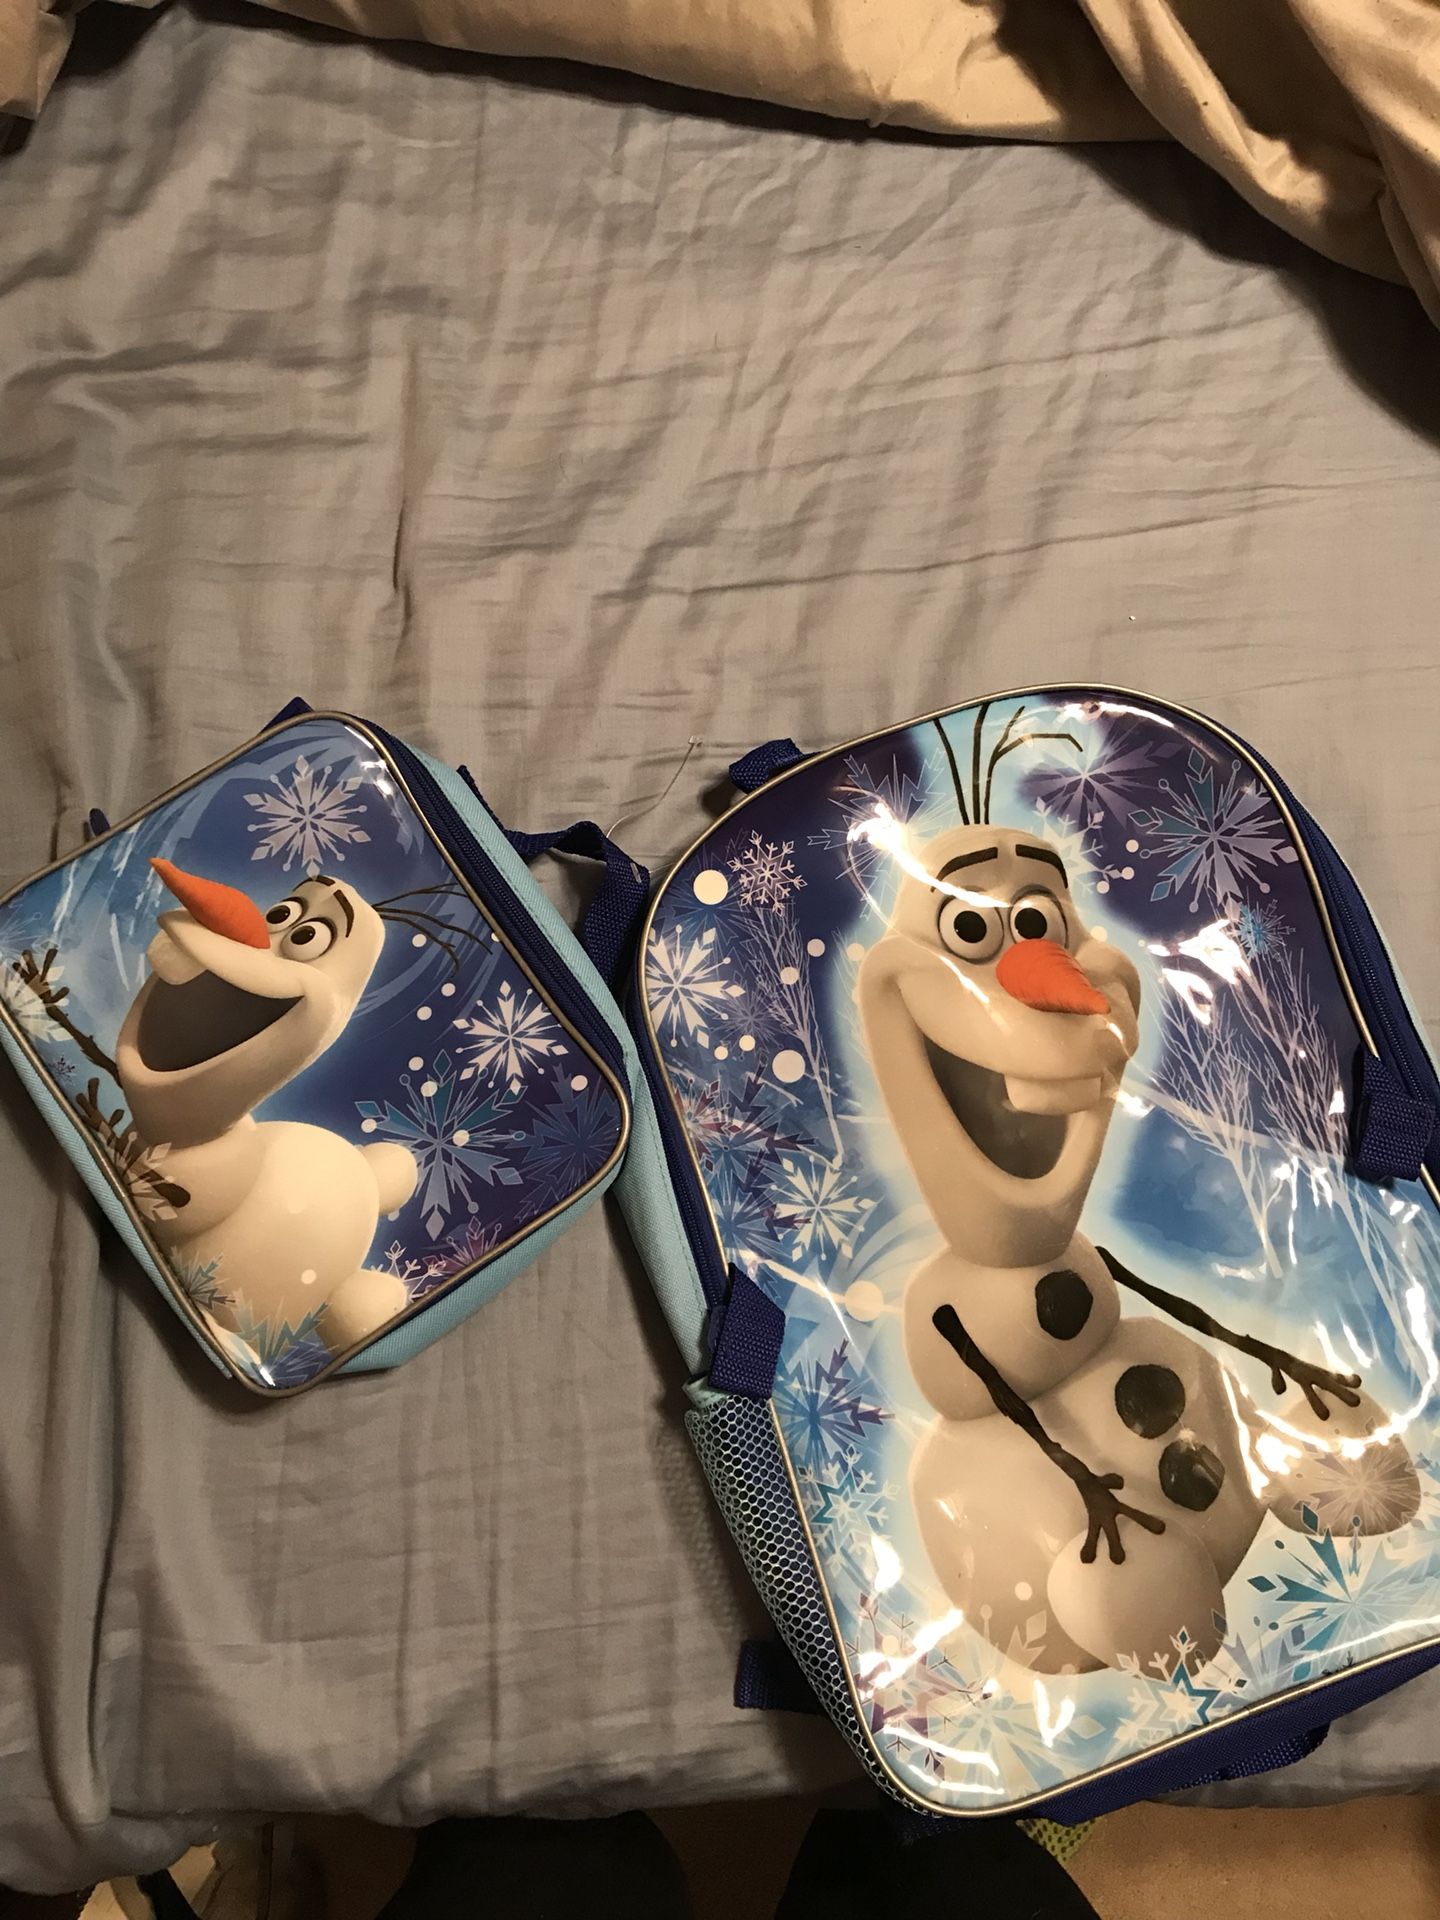 Disney Frozen Olaf back pack and lunch box